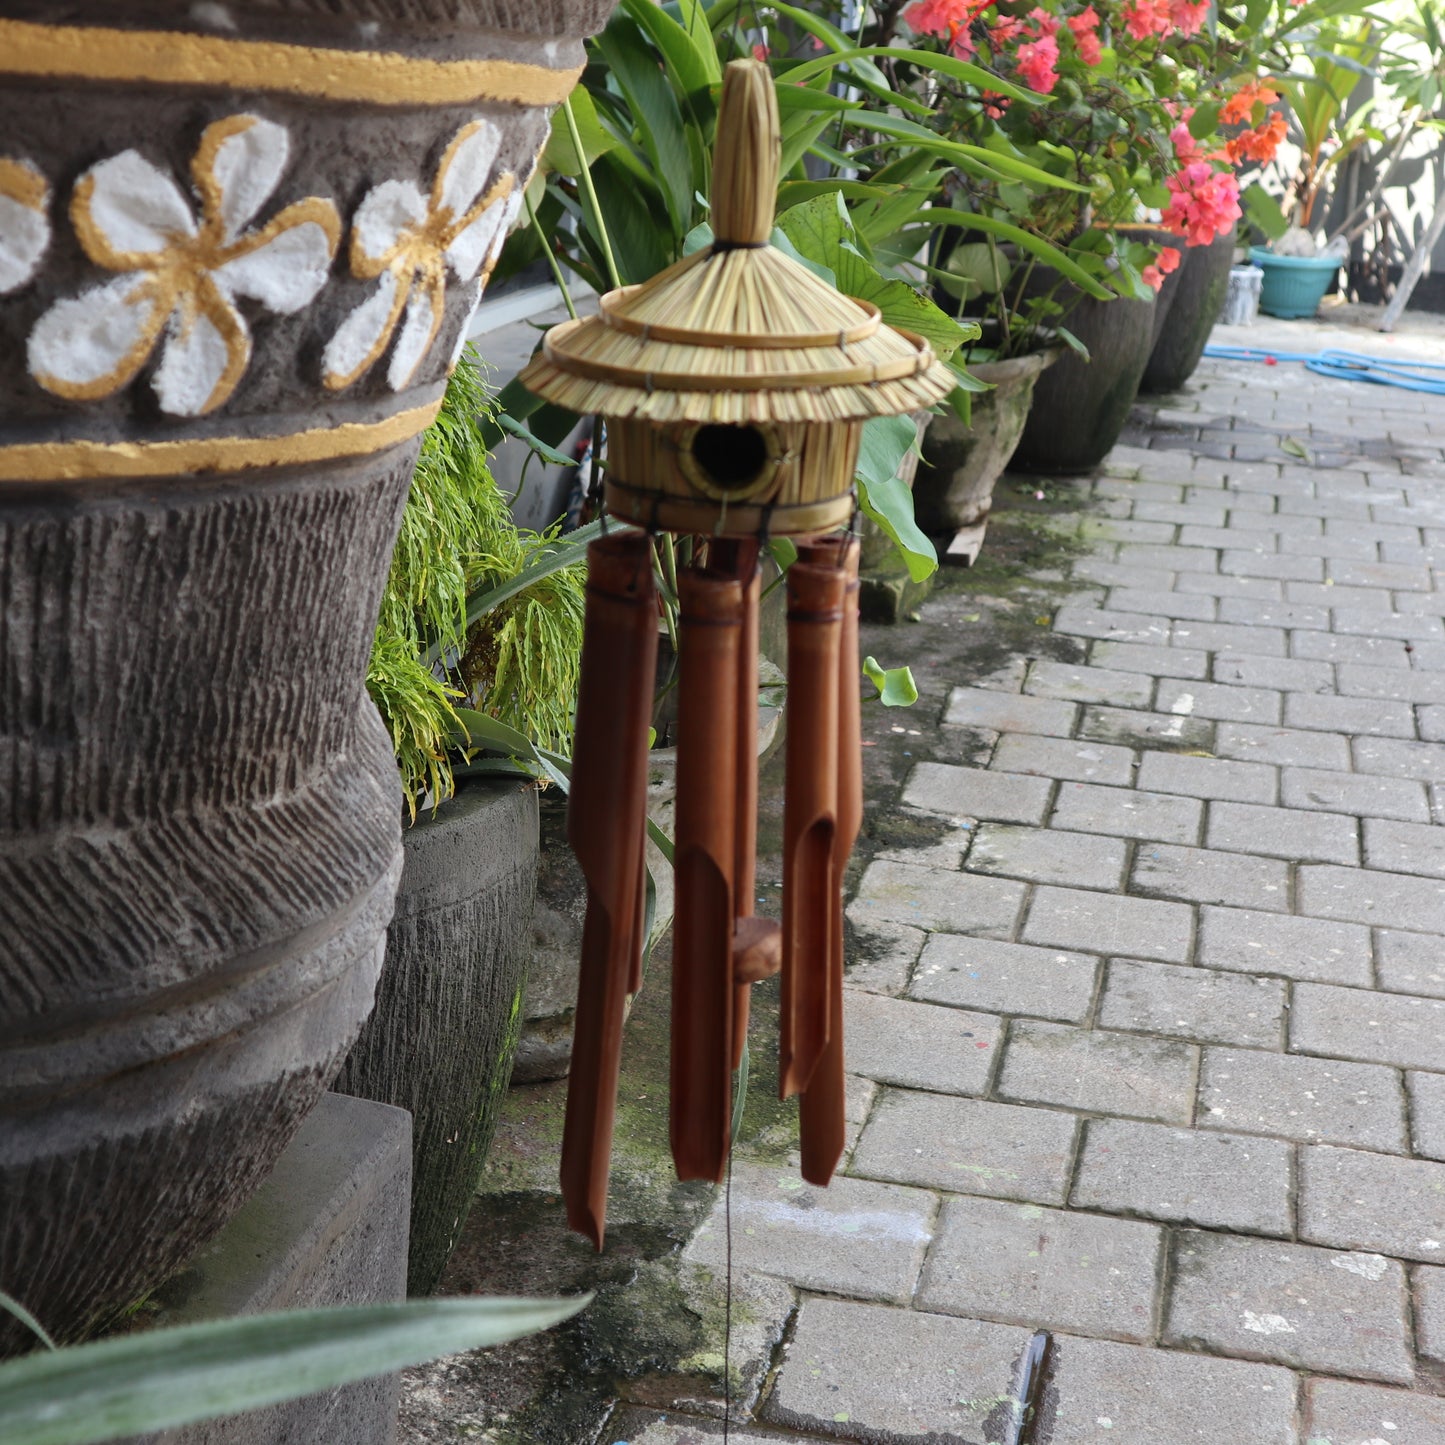 Round Seagrass Garden Bird Box with WInd Chimes - Small or Large Available